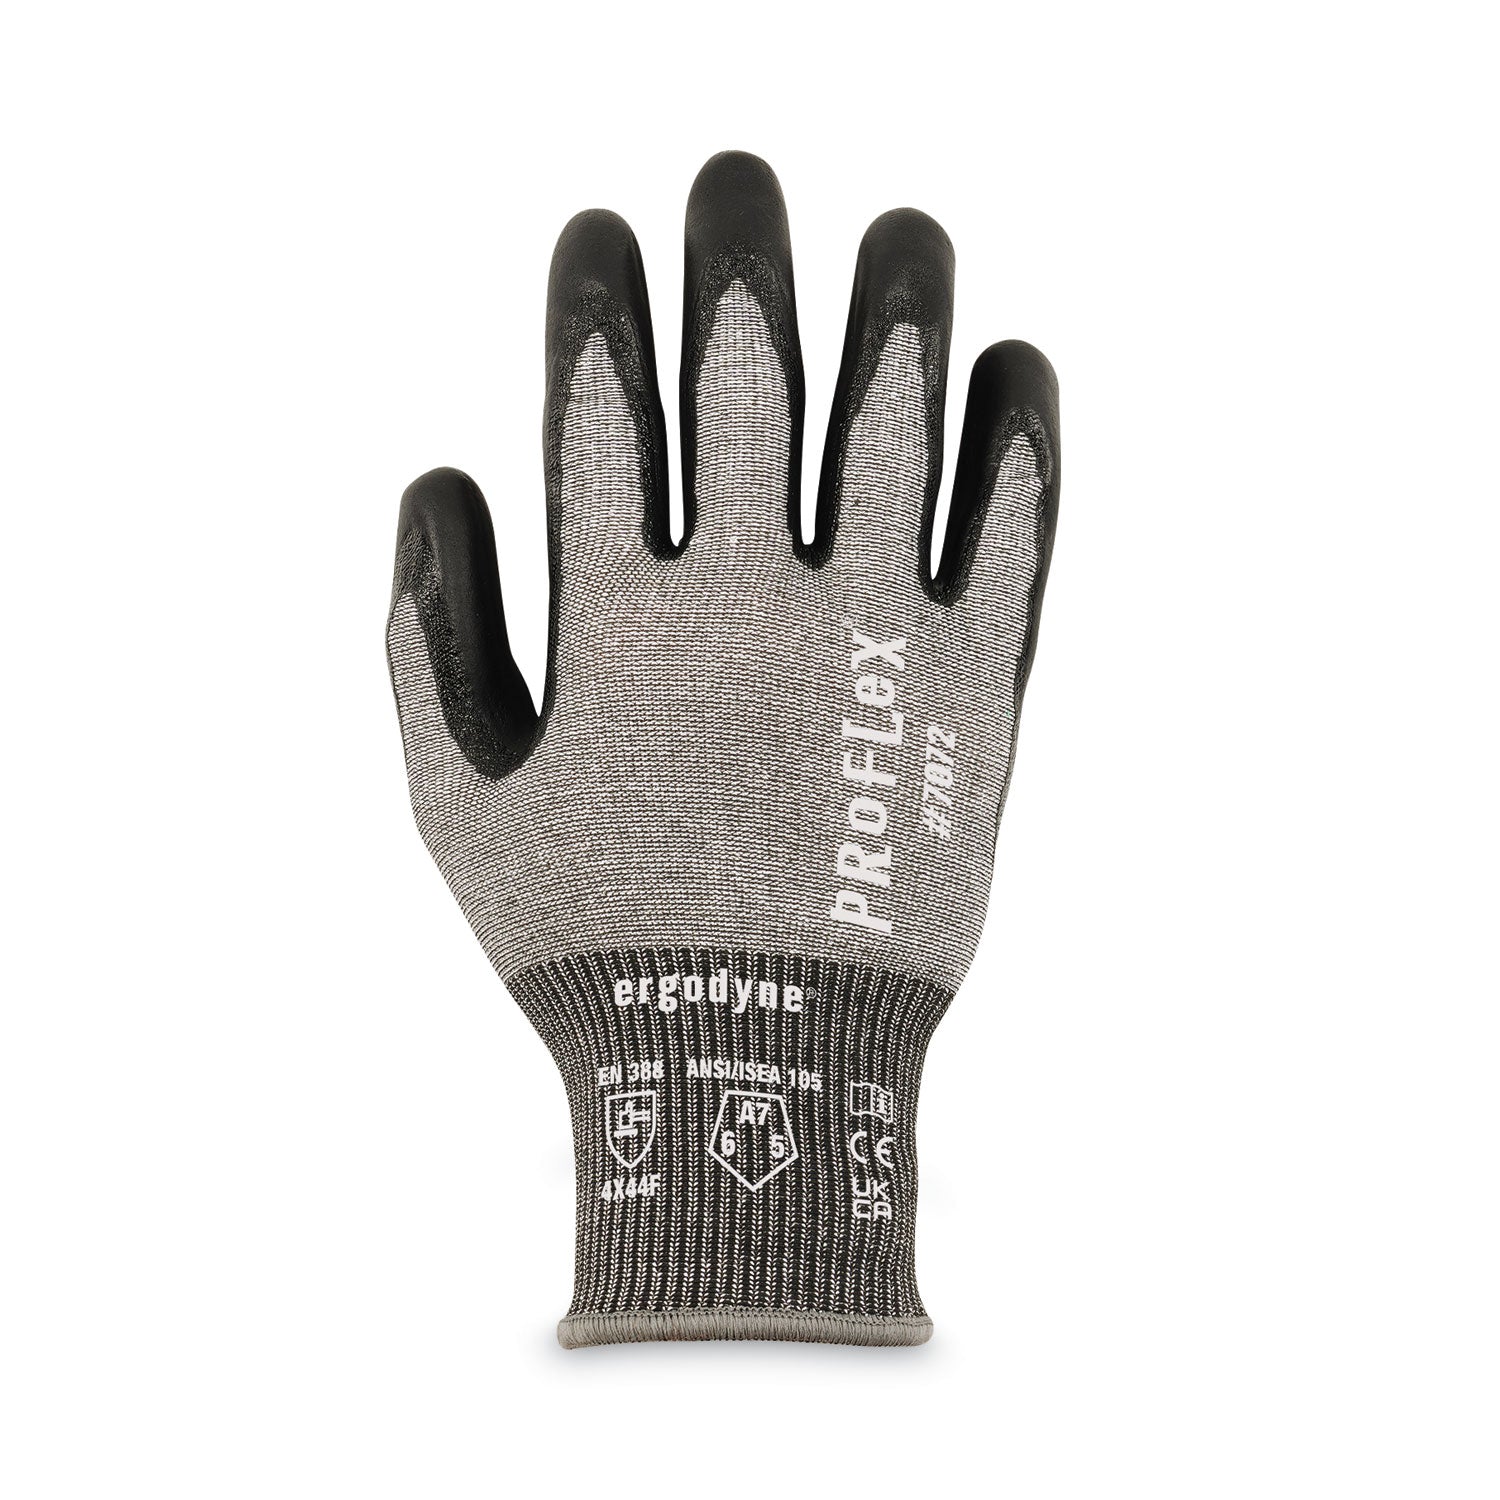 proflex-7072-ansi-a7-nitrile-coated-cr-gloves-gray-x-large-12-pairs-pack-ships-in-1-3-business-days_ego10305 - 4